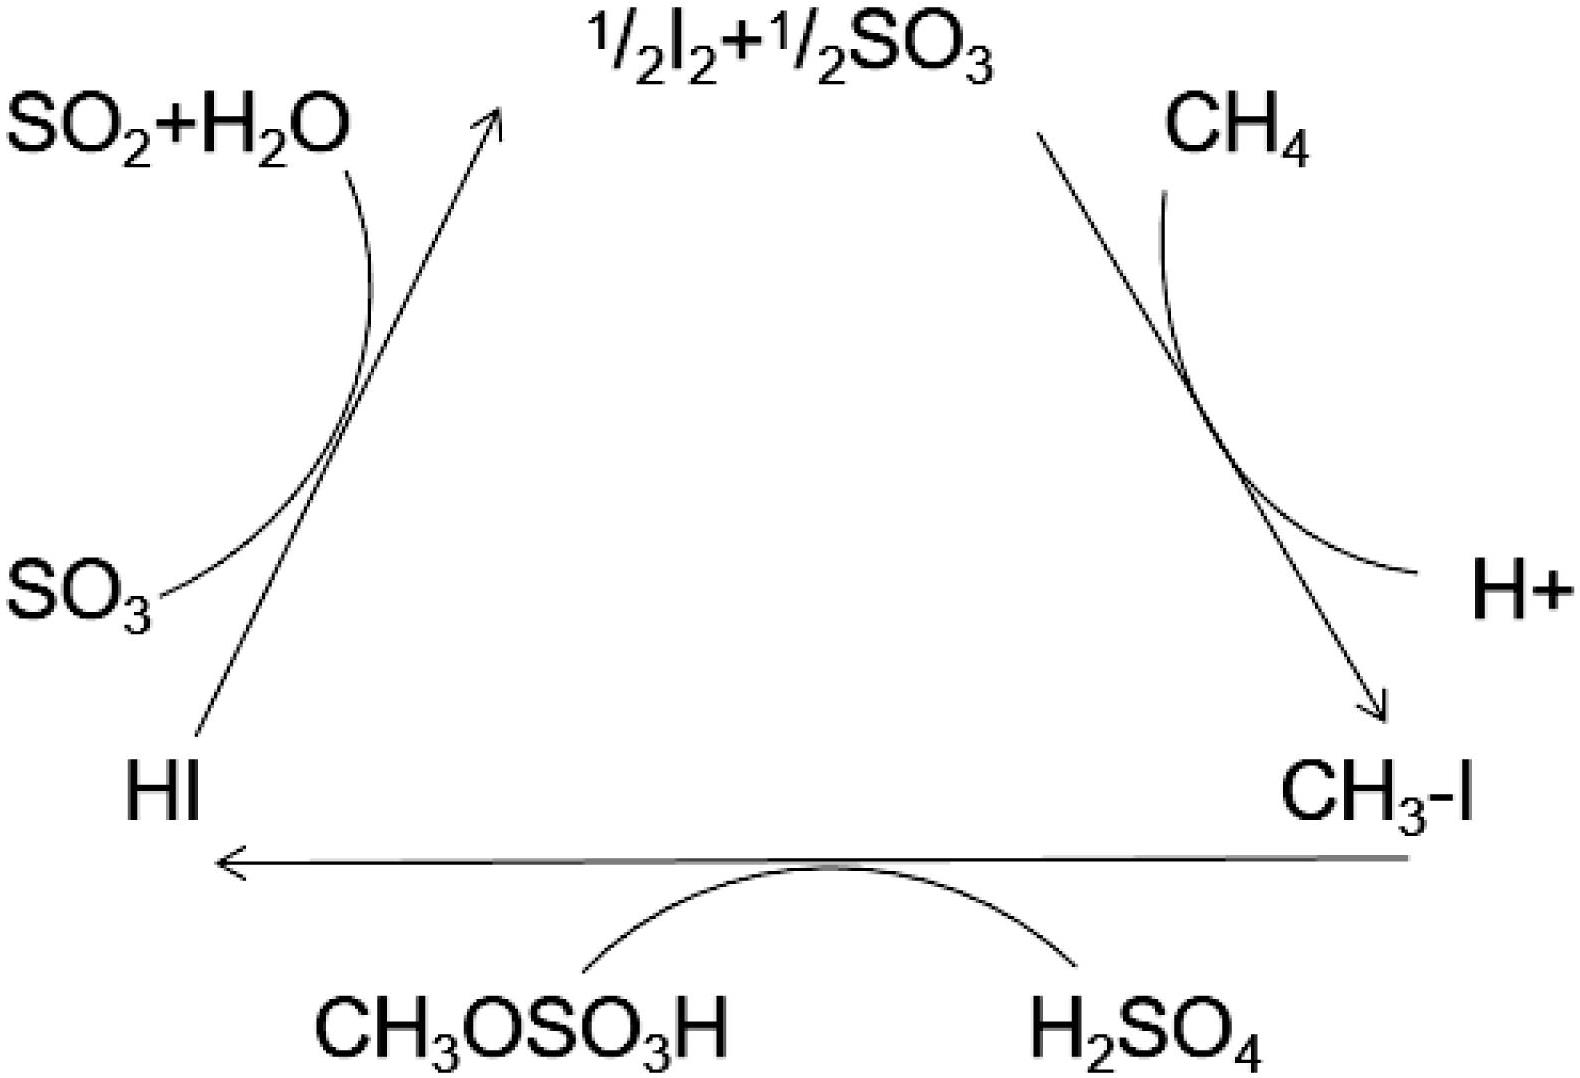 Recent Advances in Direct Oxidation of Methane to Methanol